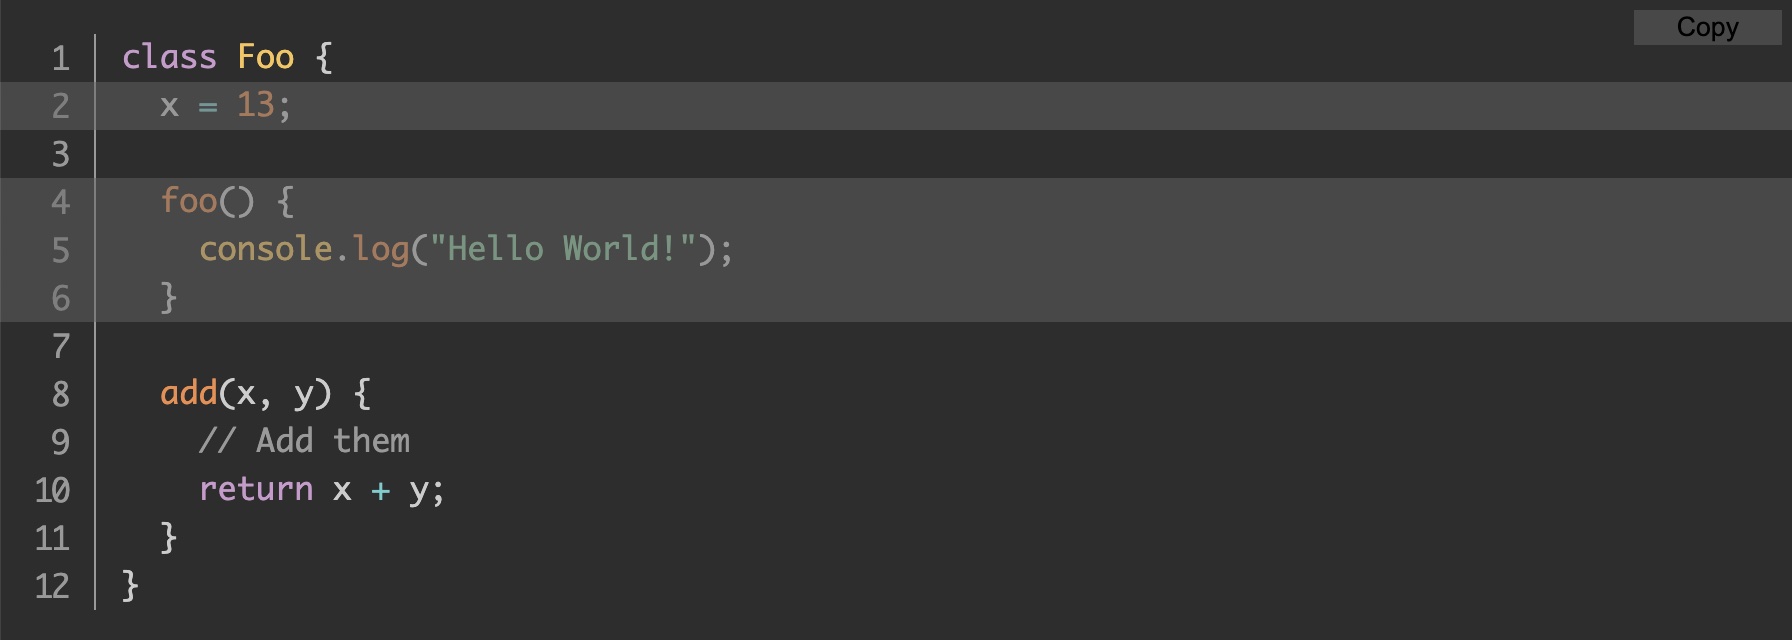 Syntax highlighting for a block of Markdown code.